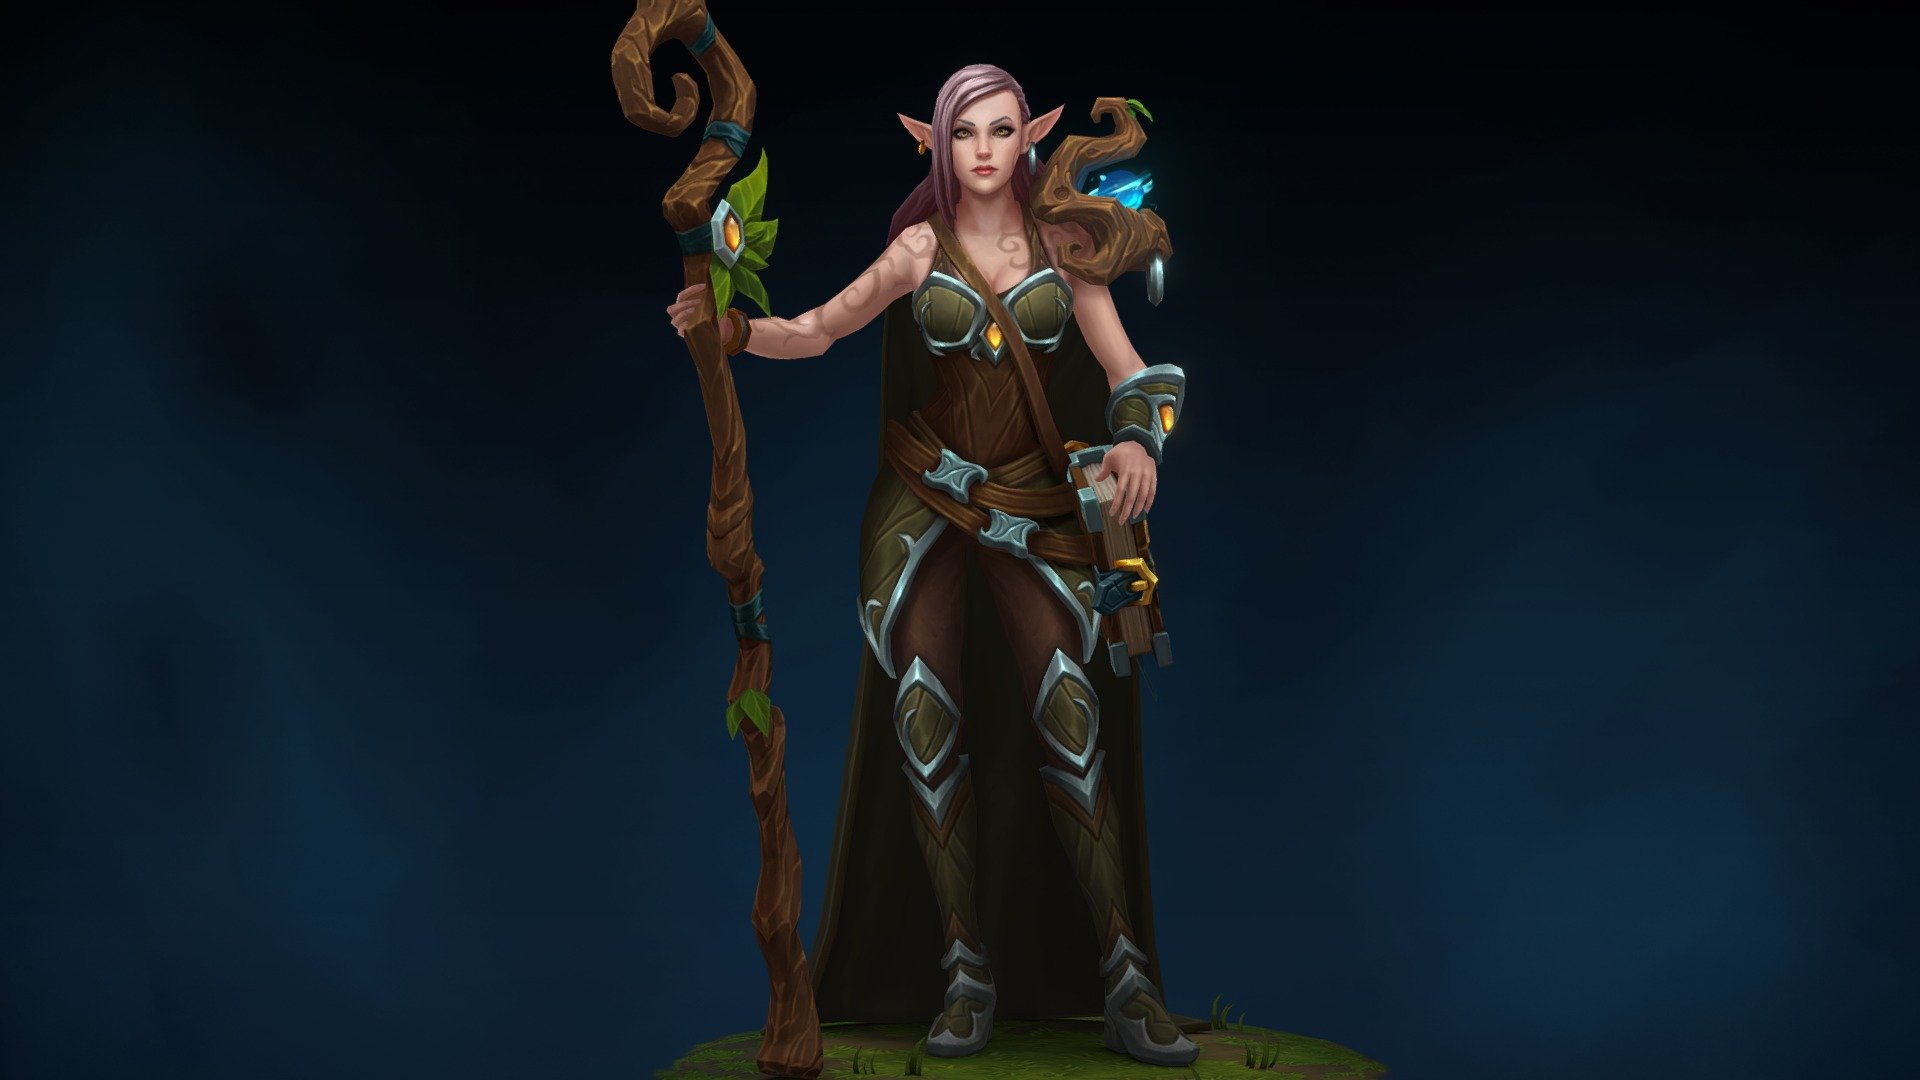 Hey all!
Here’s the latest character model I did for Runescape - Merethiel.
Full project here:
https://www.artstation.com/artwork/6rNkx
Concept art was made by the amazing Thomas Karlsson! - https://www.artstation.com/thomaskarlsson
Lore by: Kyle Robson - https://twitter.com/jagexramen
Pose and in game animations by: Victor Gil http://www.victorgilanimator.com/
In game animations by: Hing Chan - Merethiel - Runescape - 3D model by bernardo cristovao (@bernardocristovao) 3d model